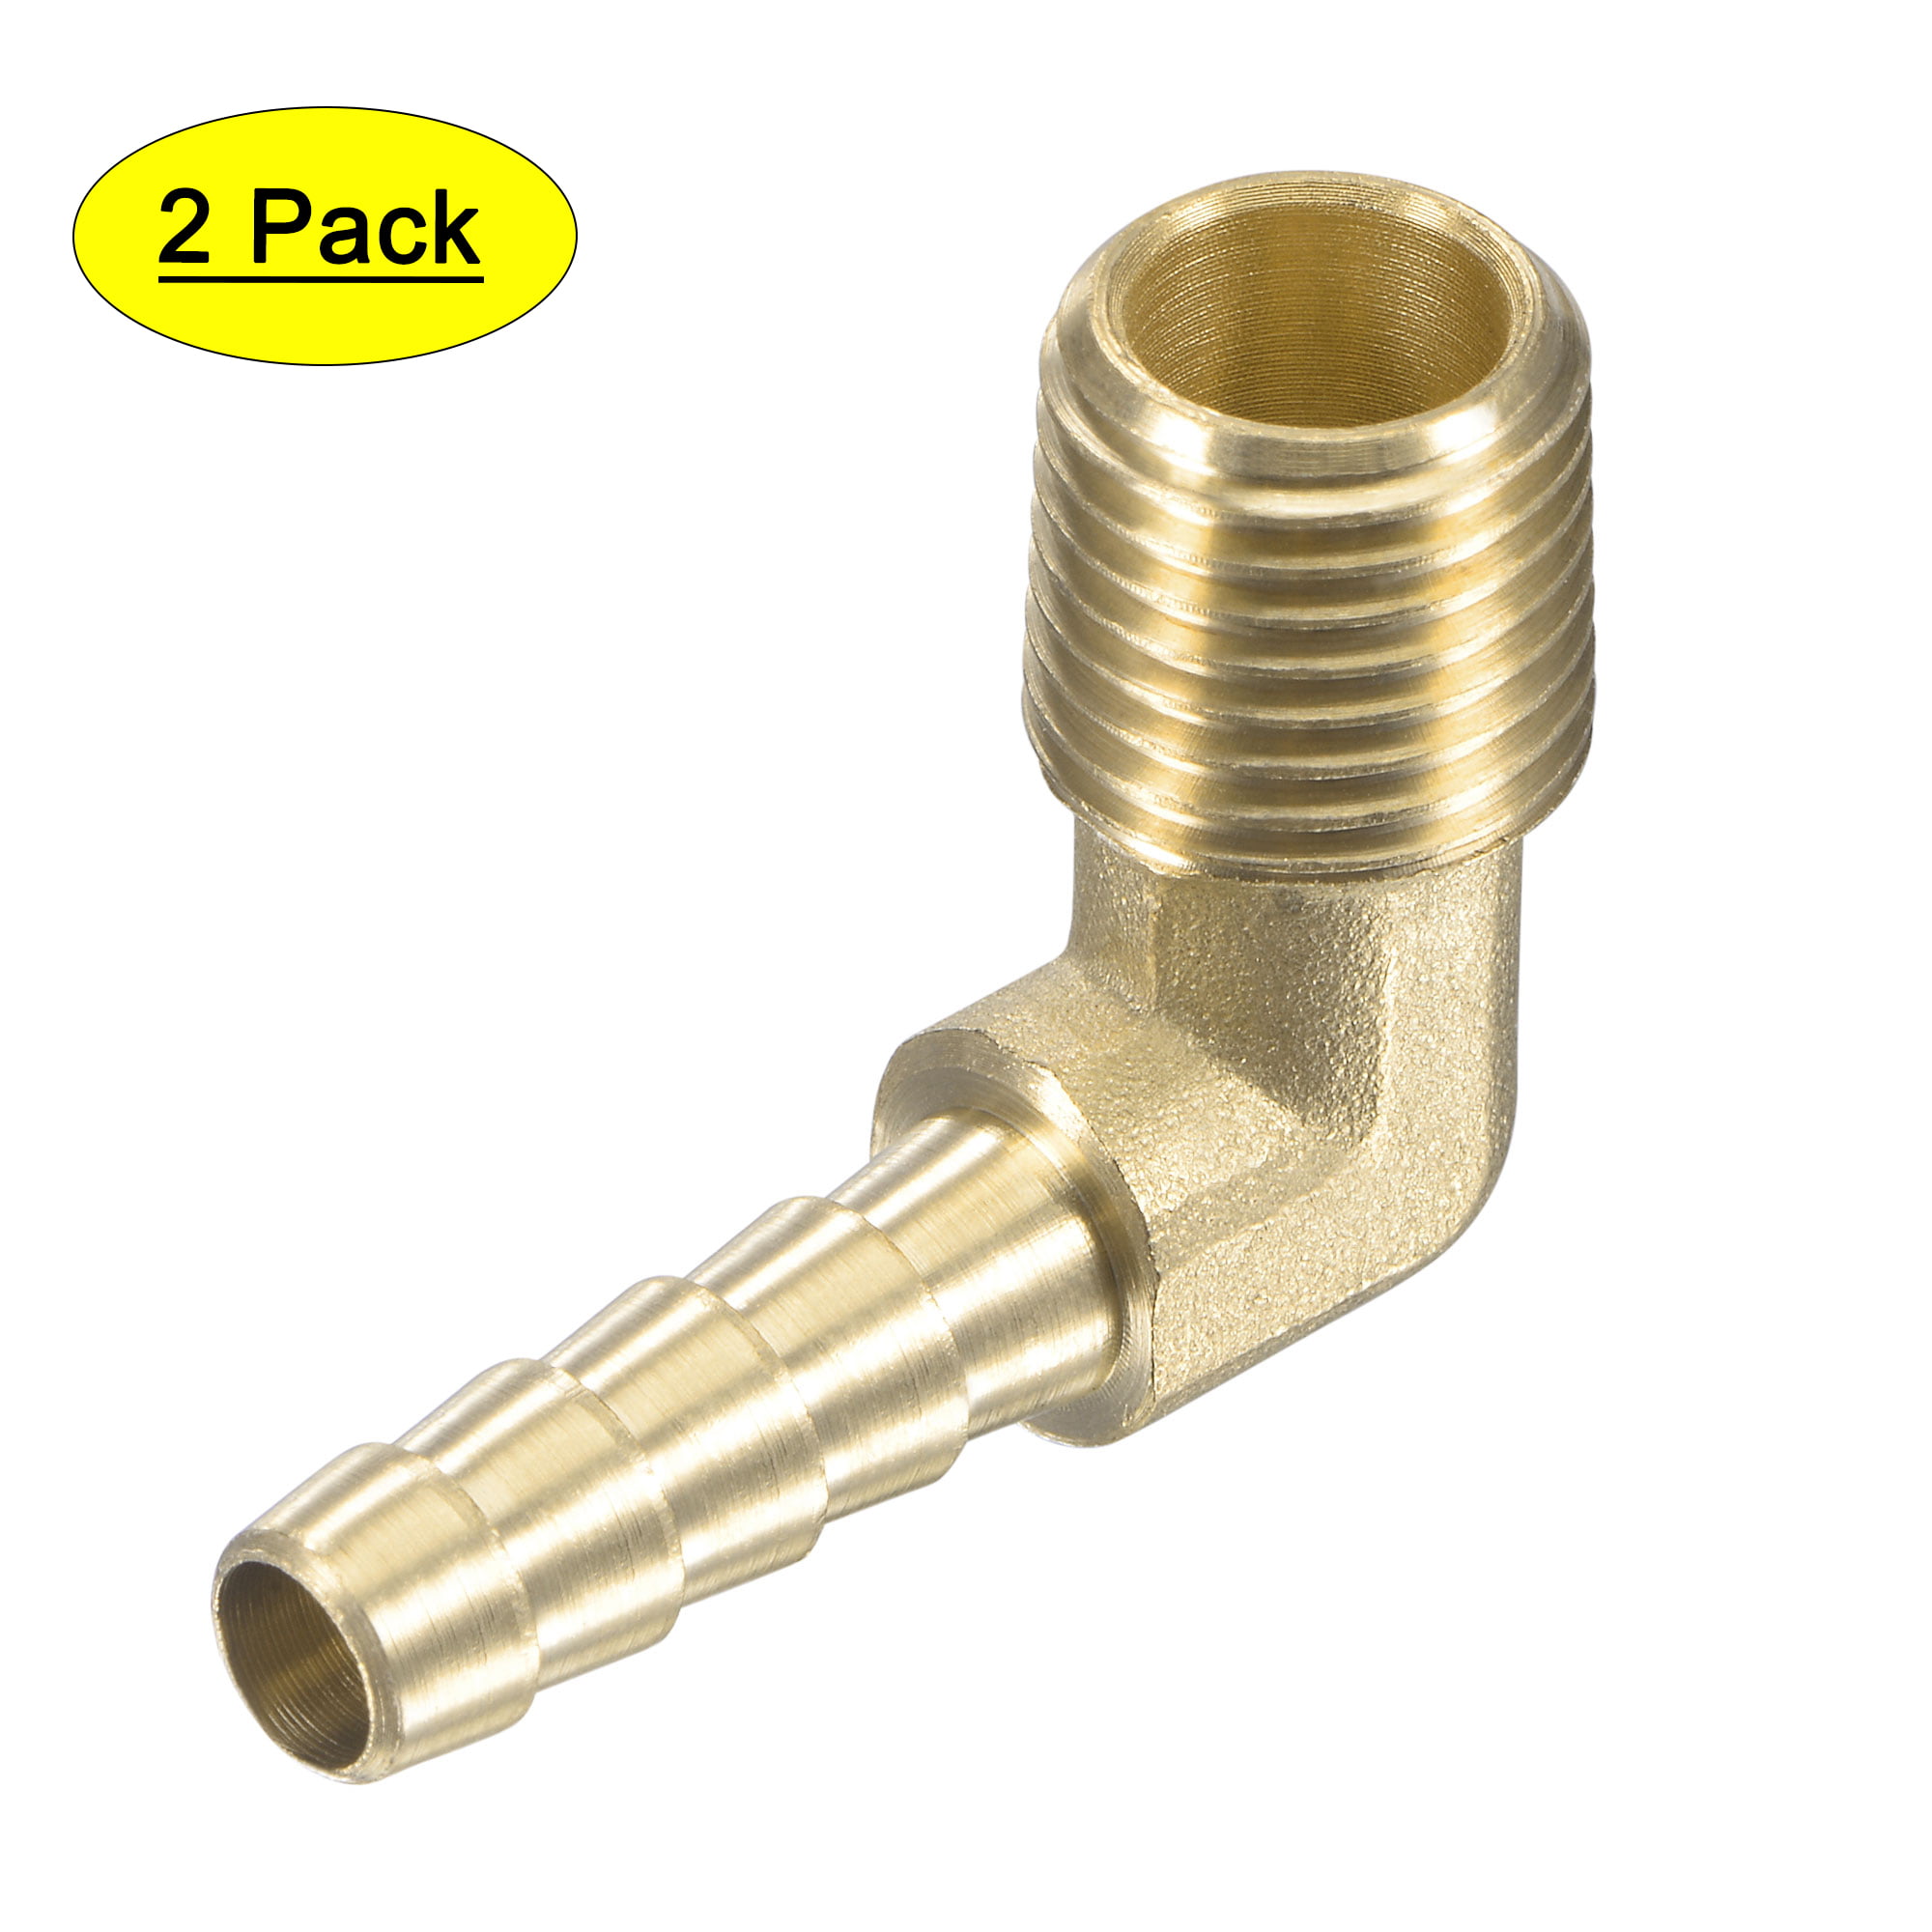 3/8" Hose ID Brass Barbed Male Elbow Fittings Pack of 3 1/4" NPT Male 